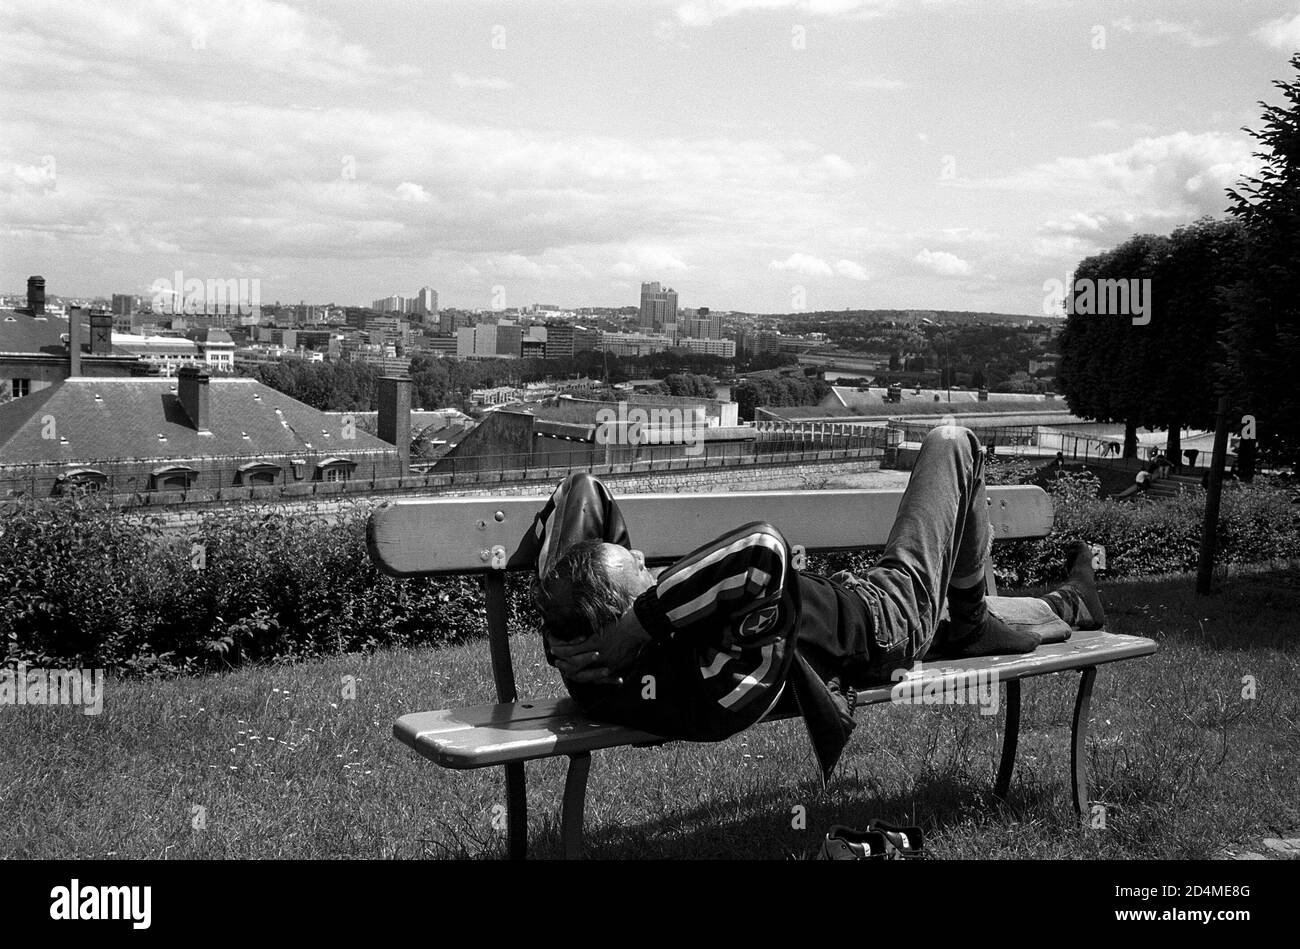 AJAXNETPHOTO. 28TH MAY, 2002. SAINT-CLOUD, ISLE DE FRANCE, FRANCE. - CHILLING OUT - VIEW OF PARIS SUBURBS FROM NEAR THE JARDIN DU TOCADERO.PHOTO:JONATHAN EASTLAND/AJAX REF:30606 21 Stock Photo